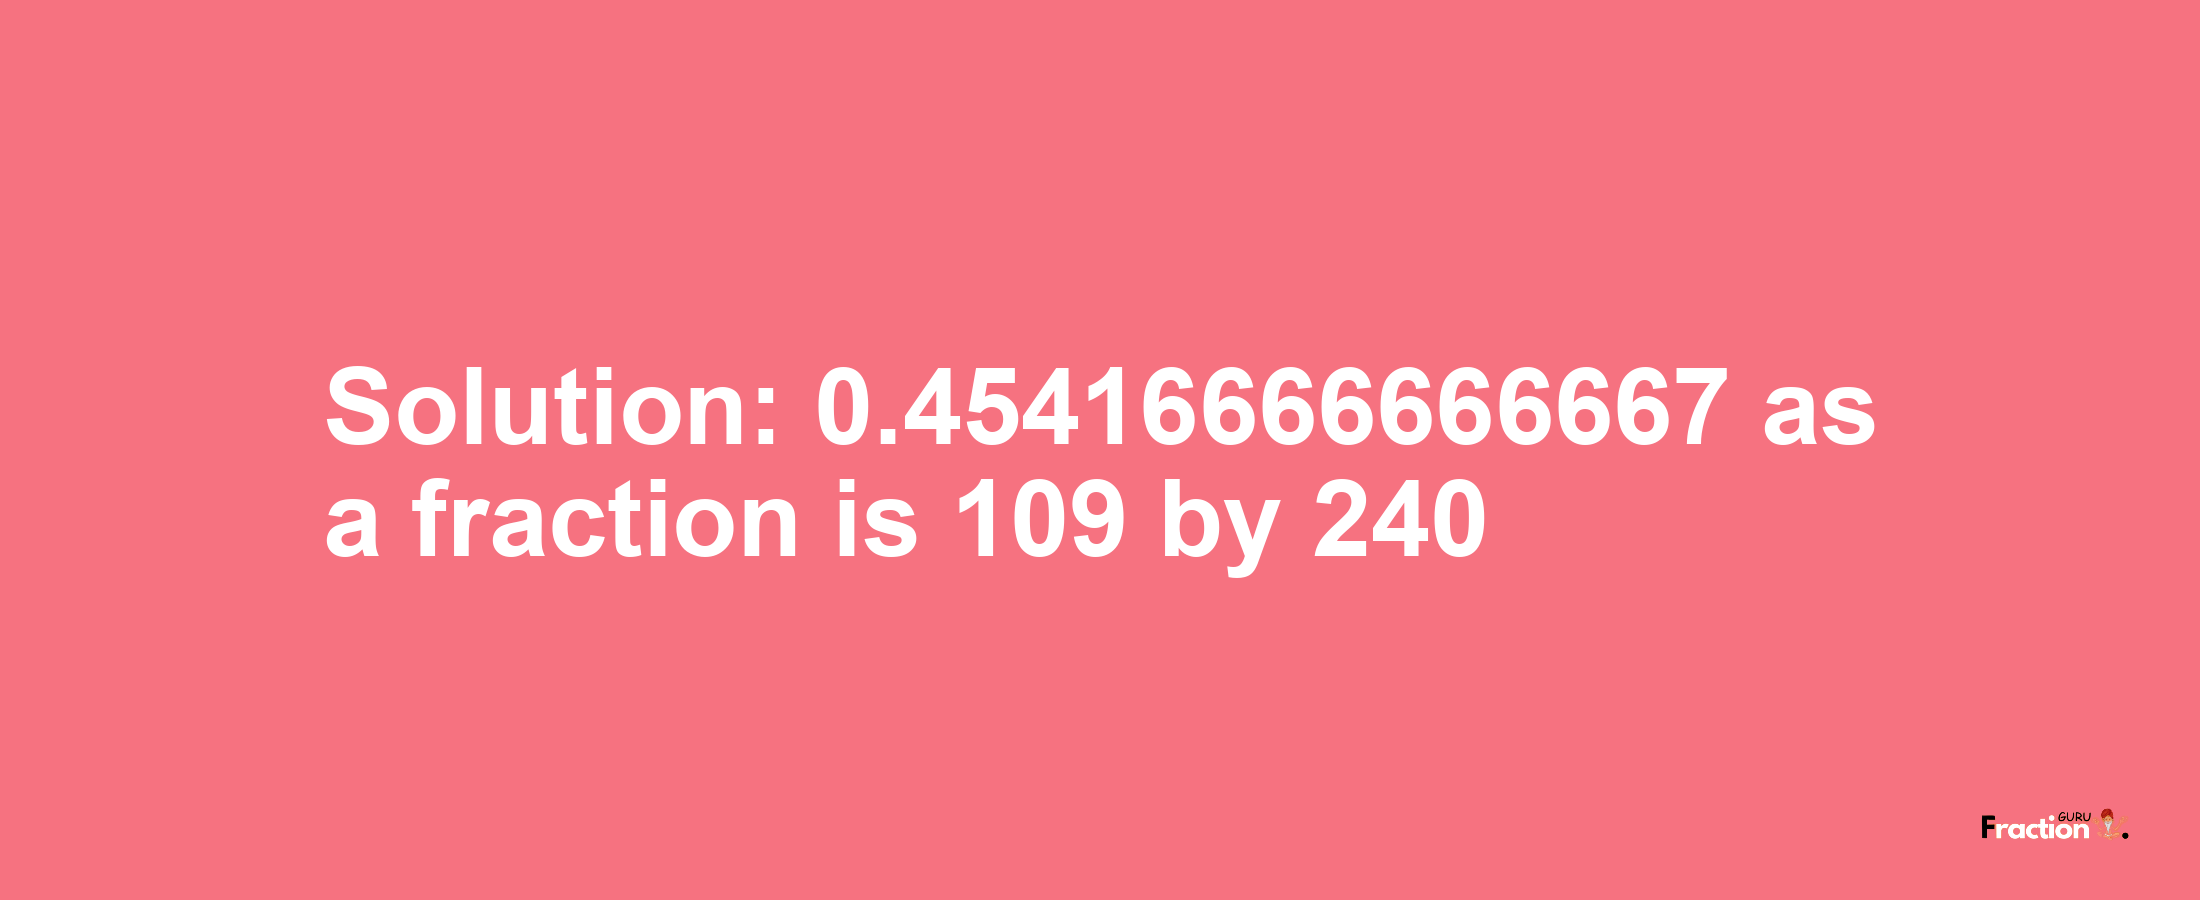 Solution:0.45416666666667 as a fraction is 109/240